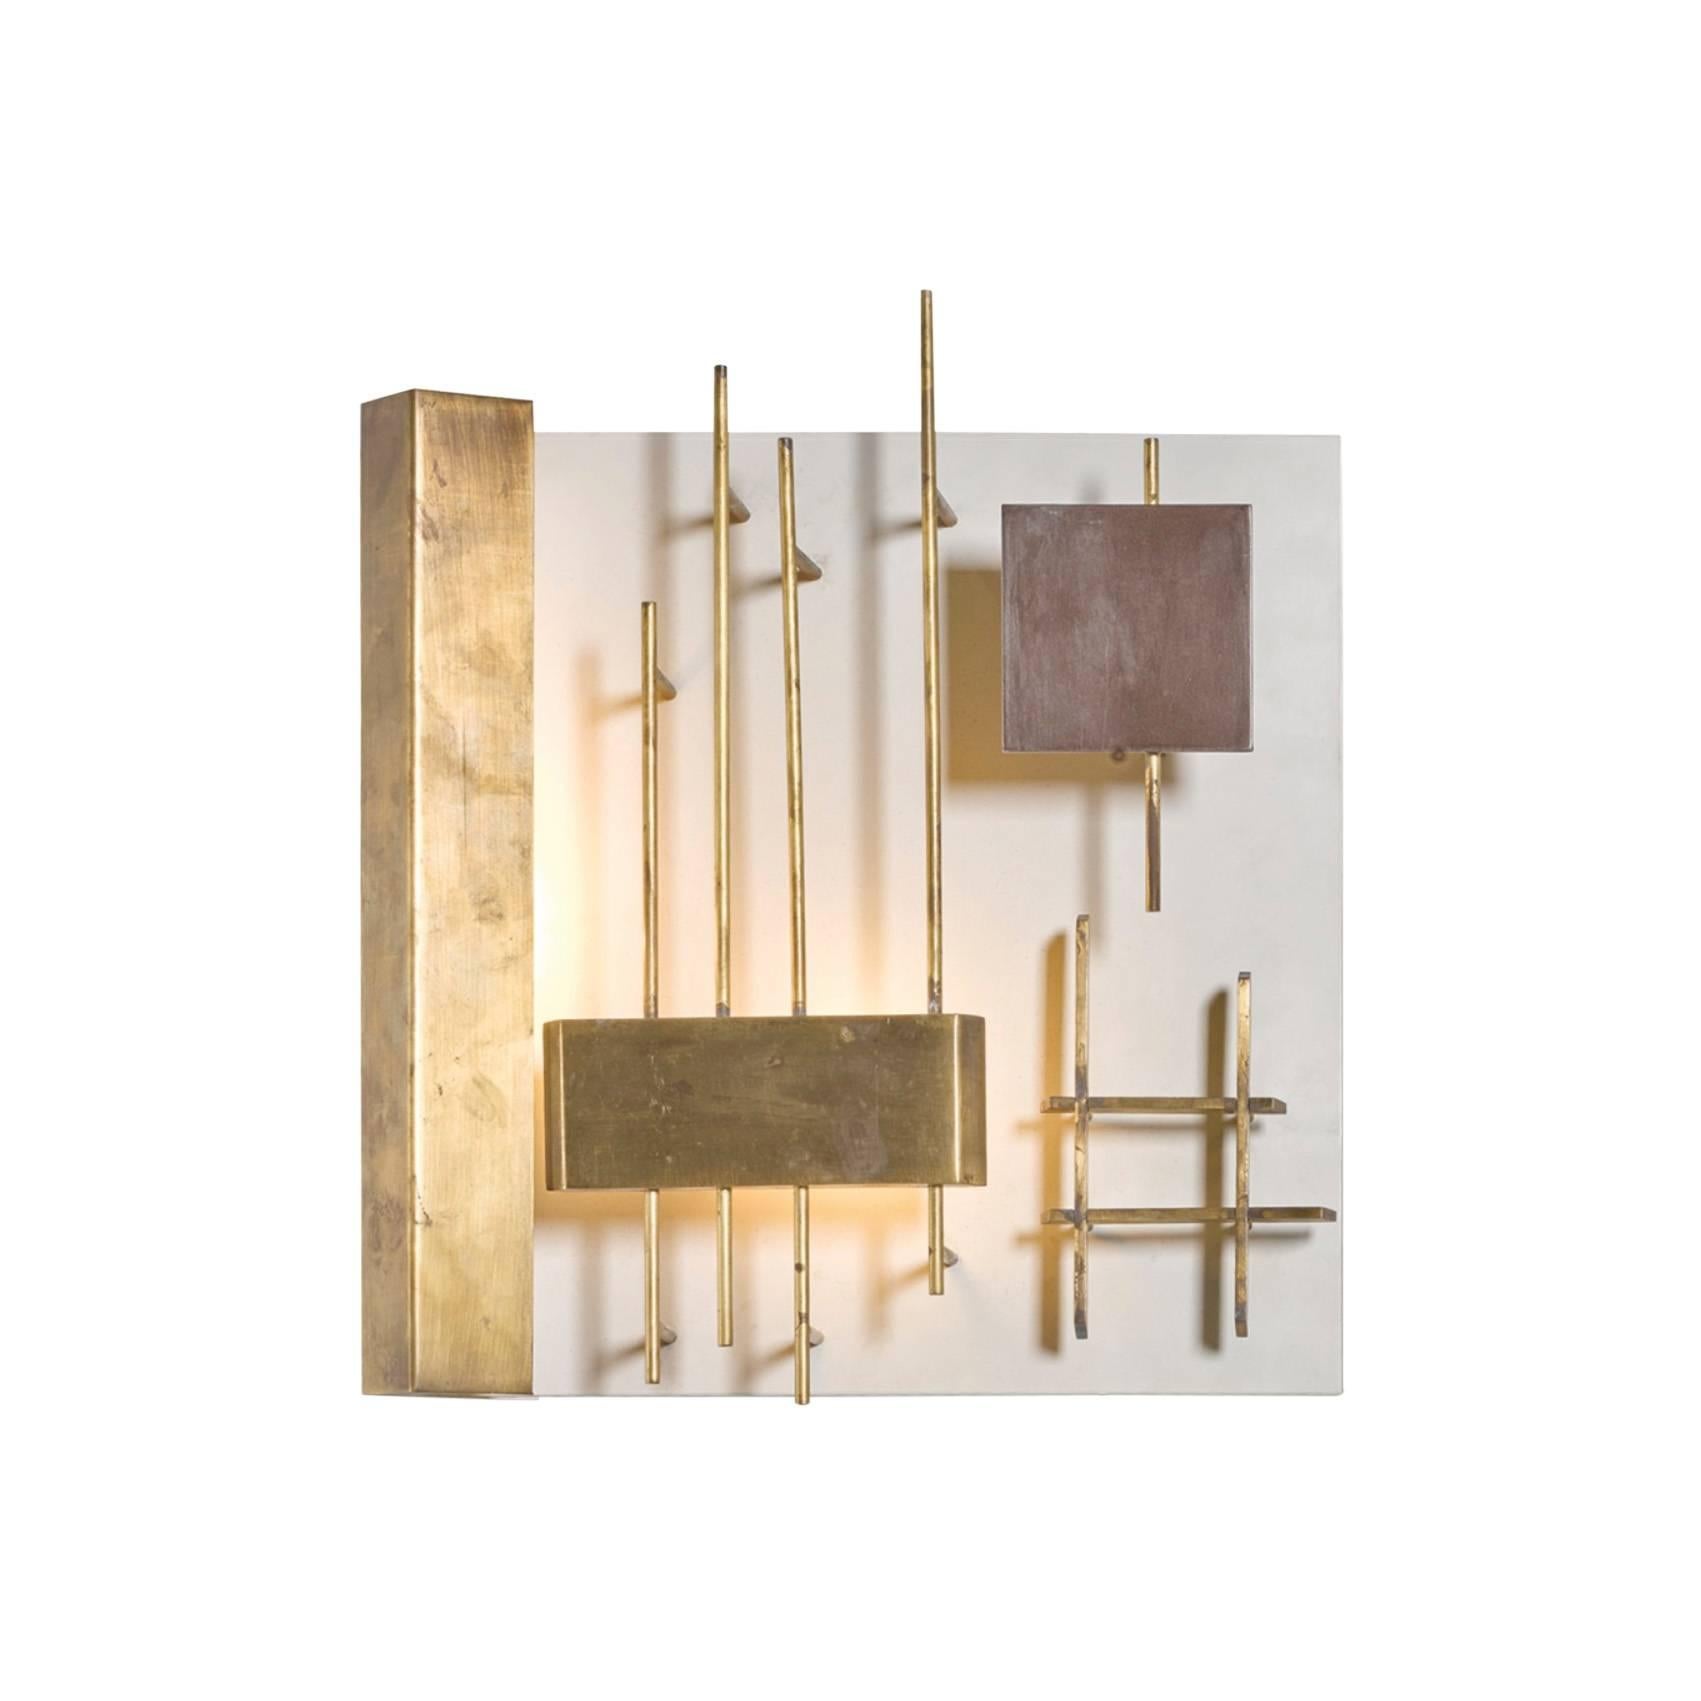 Pair of wall lights Quadri Luminosi, model numbers 575 and 576 designed by Gio Ponti, circa 1960. Manufactured by Lumi, Italy. Brass, tubular brass, painted metal.

Dimensions: H 56 x W 40 x D 10 cm.